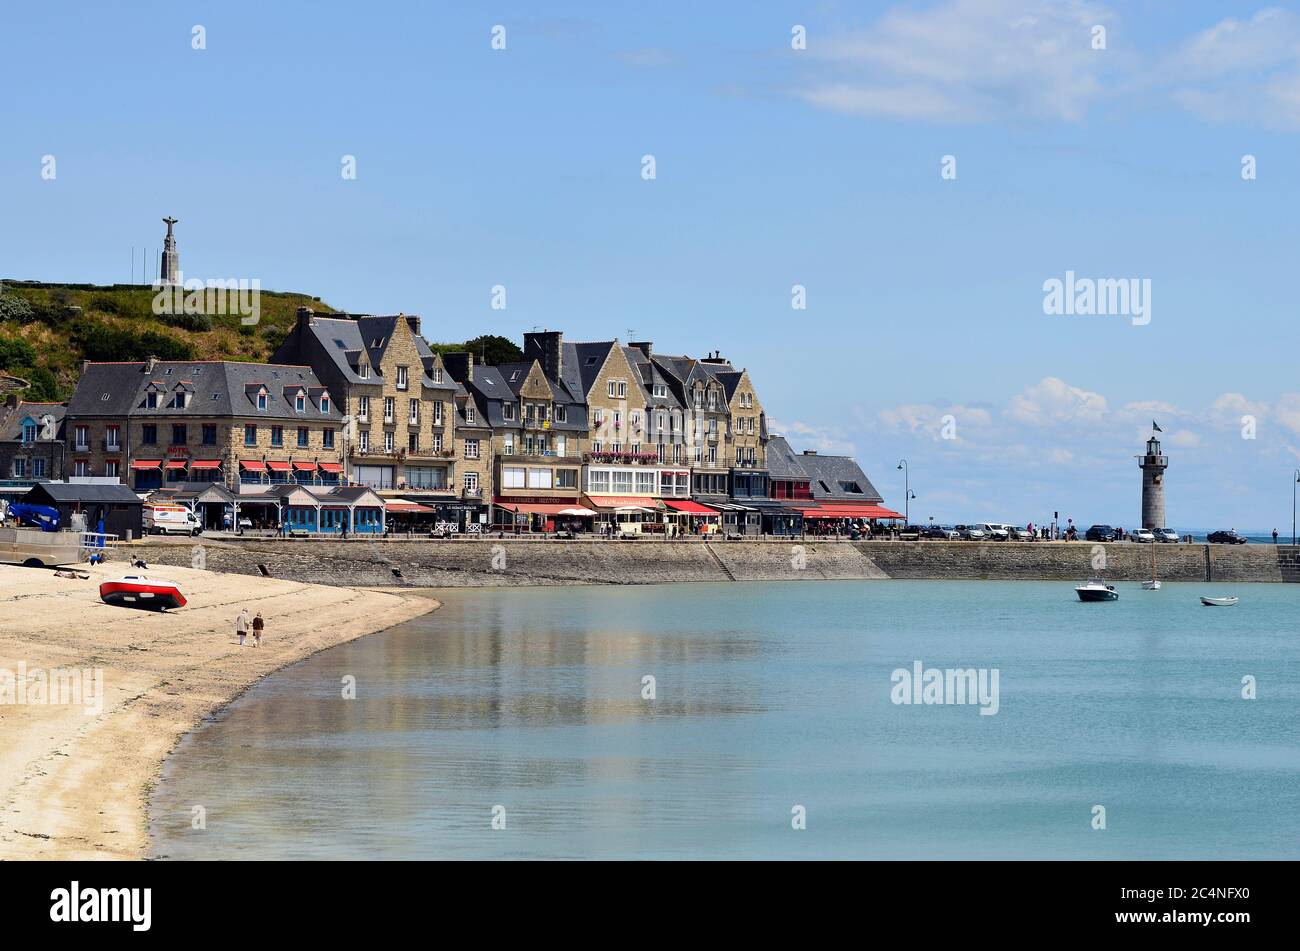 Cancale, France - June 10, 2011: Townscape of the city in Brittany, preferred tourist destination and center for oyster farming Stock Photo